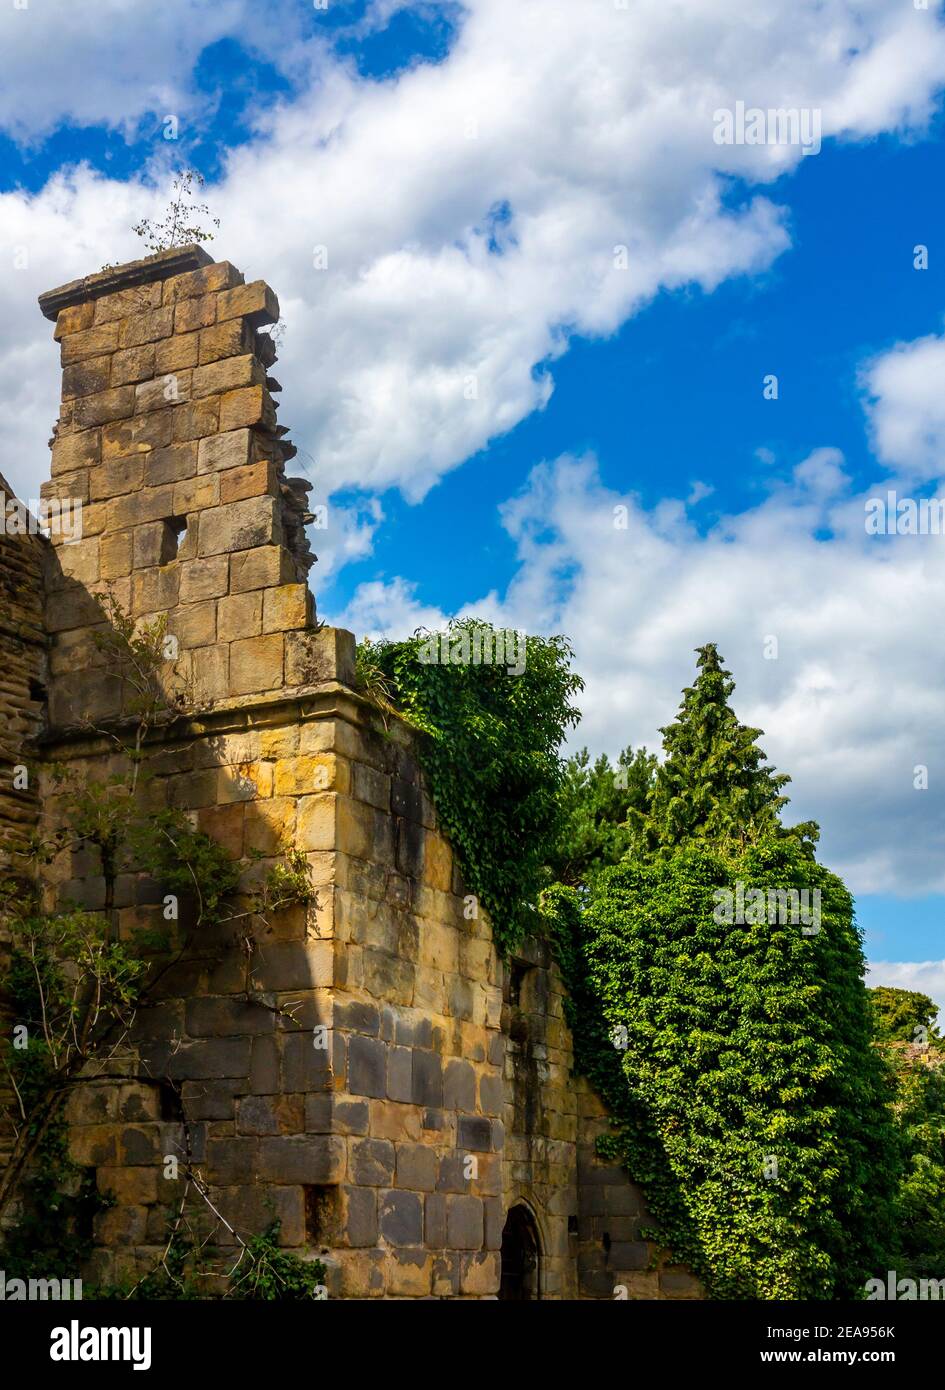 Ruins of Wingfield Manor House near Alfreton Derbyshire England UK built in 1440s and left deserted since the 1770s it once housed Mary Queen of Scots Stock Photo